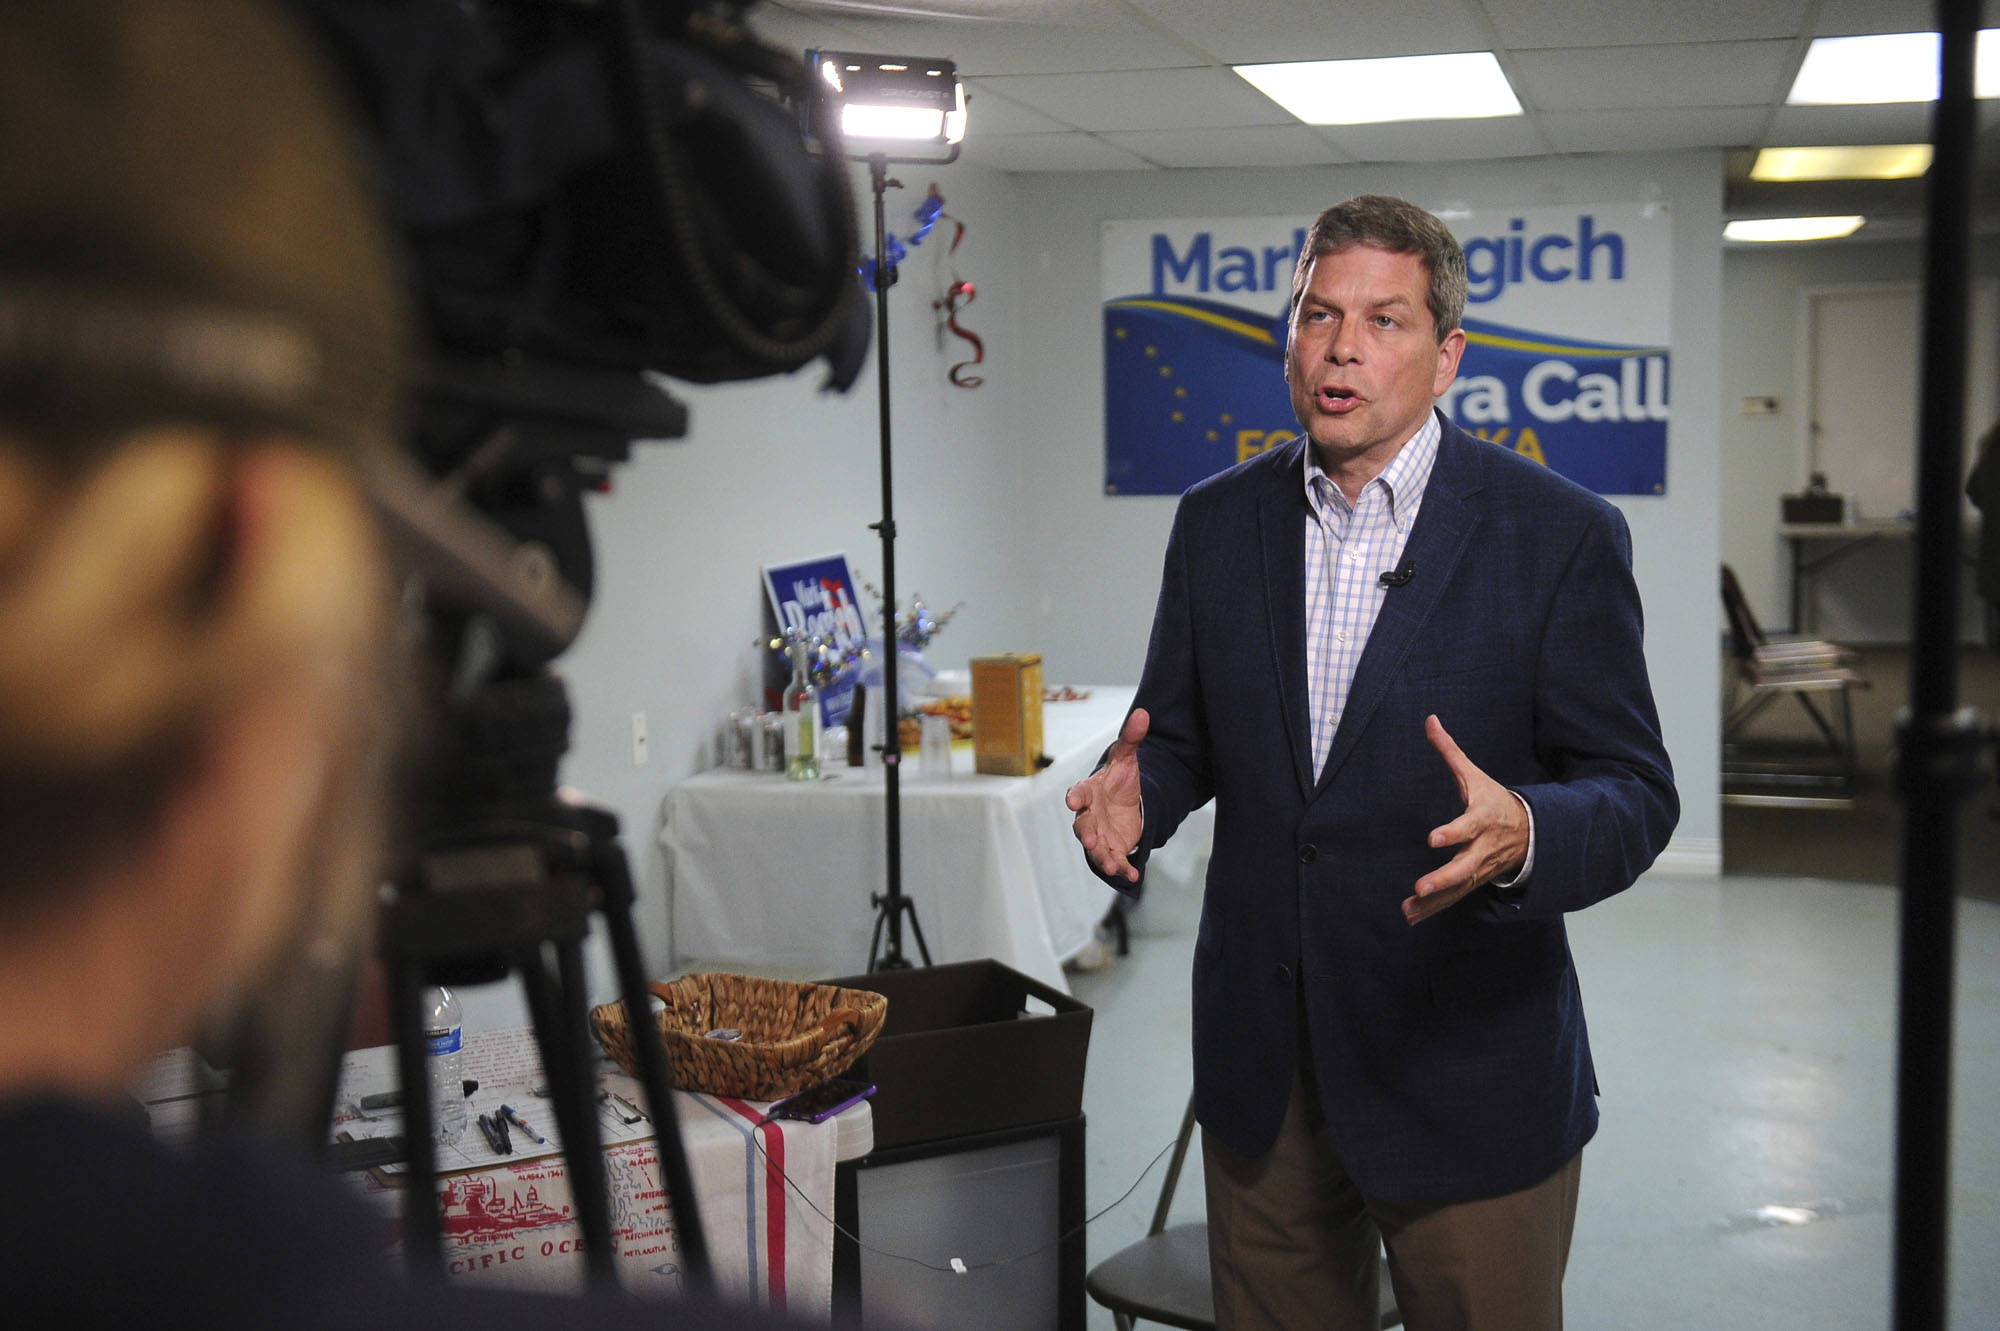 In this Aug. 21 photo, Democratic gubernatorial candidate Mark Begich is interviewed following his primary victory in Anchorage. (Michael Dinneen | The Associated Press File)